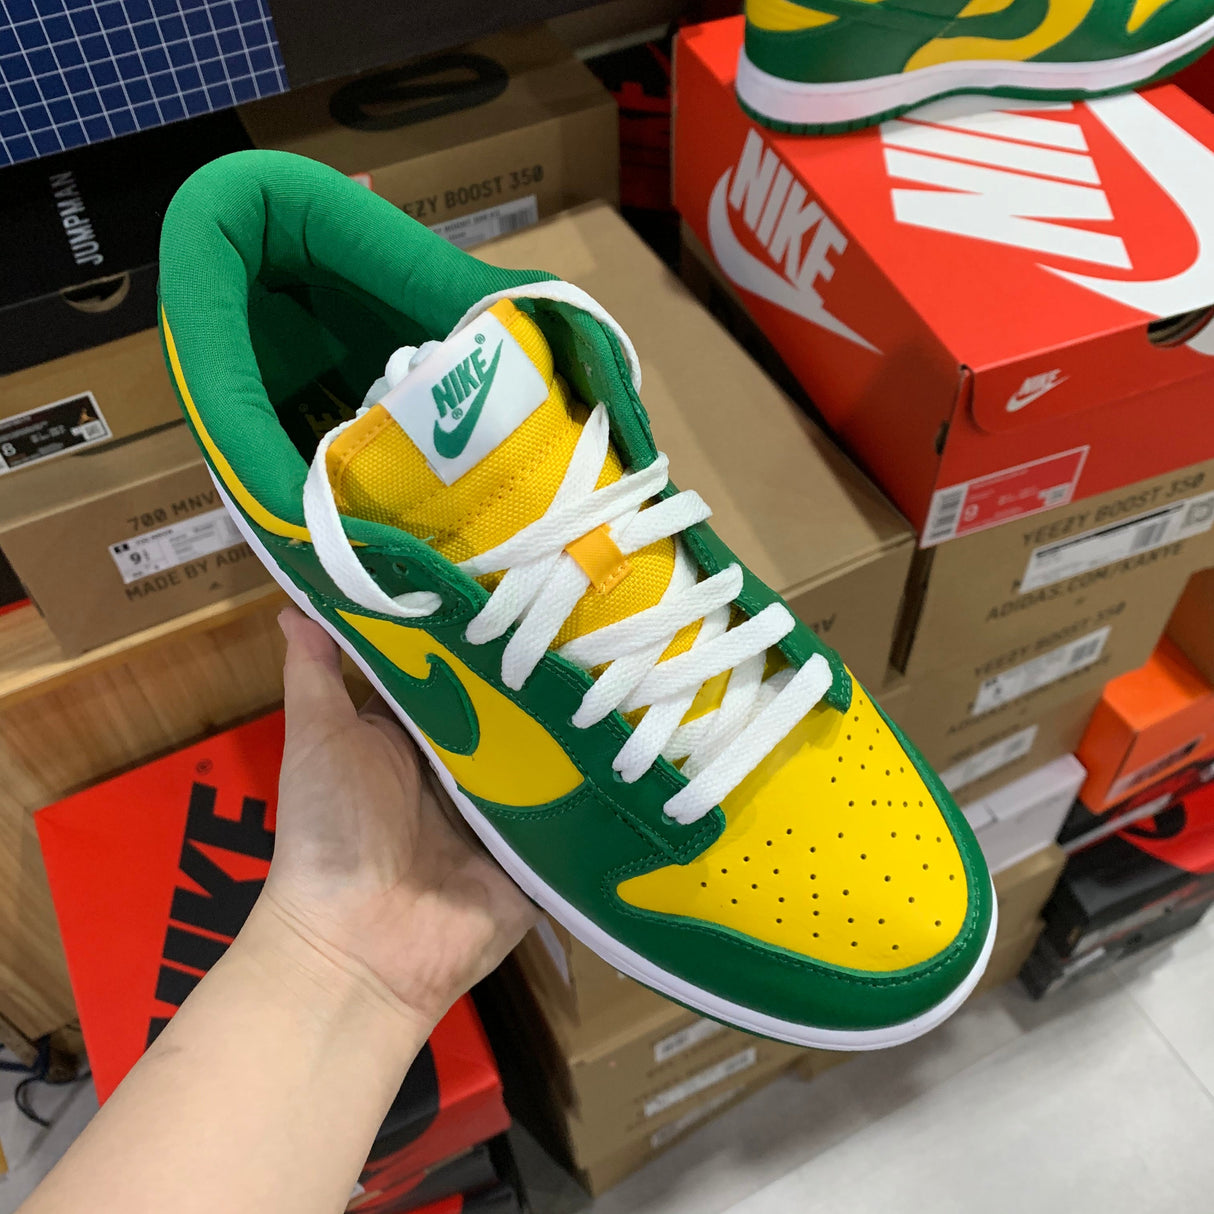 Nike Dunk Low "Brazil" - Jersey and Sneakers